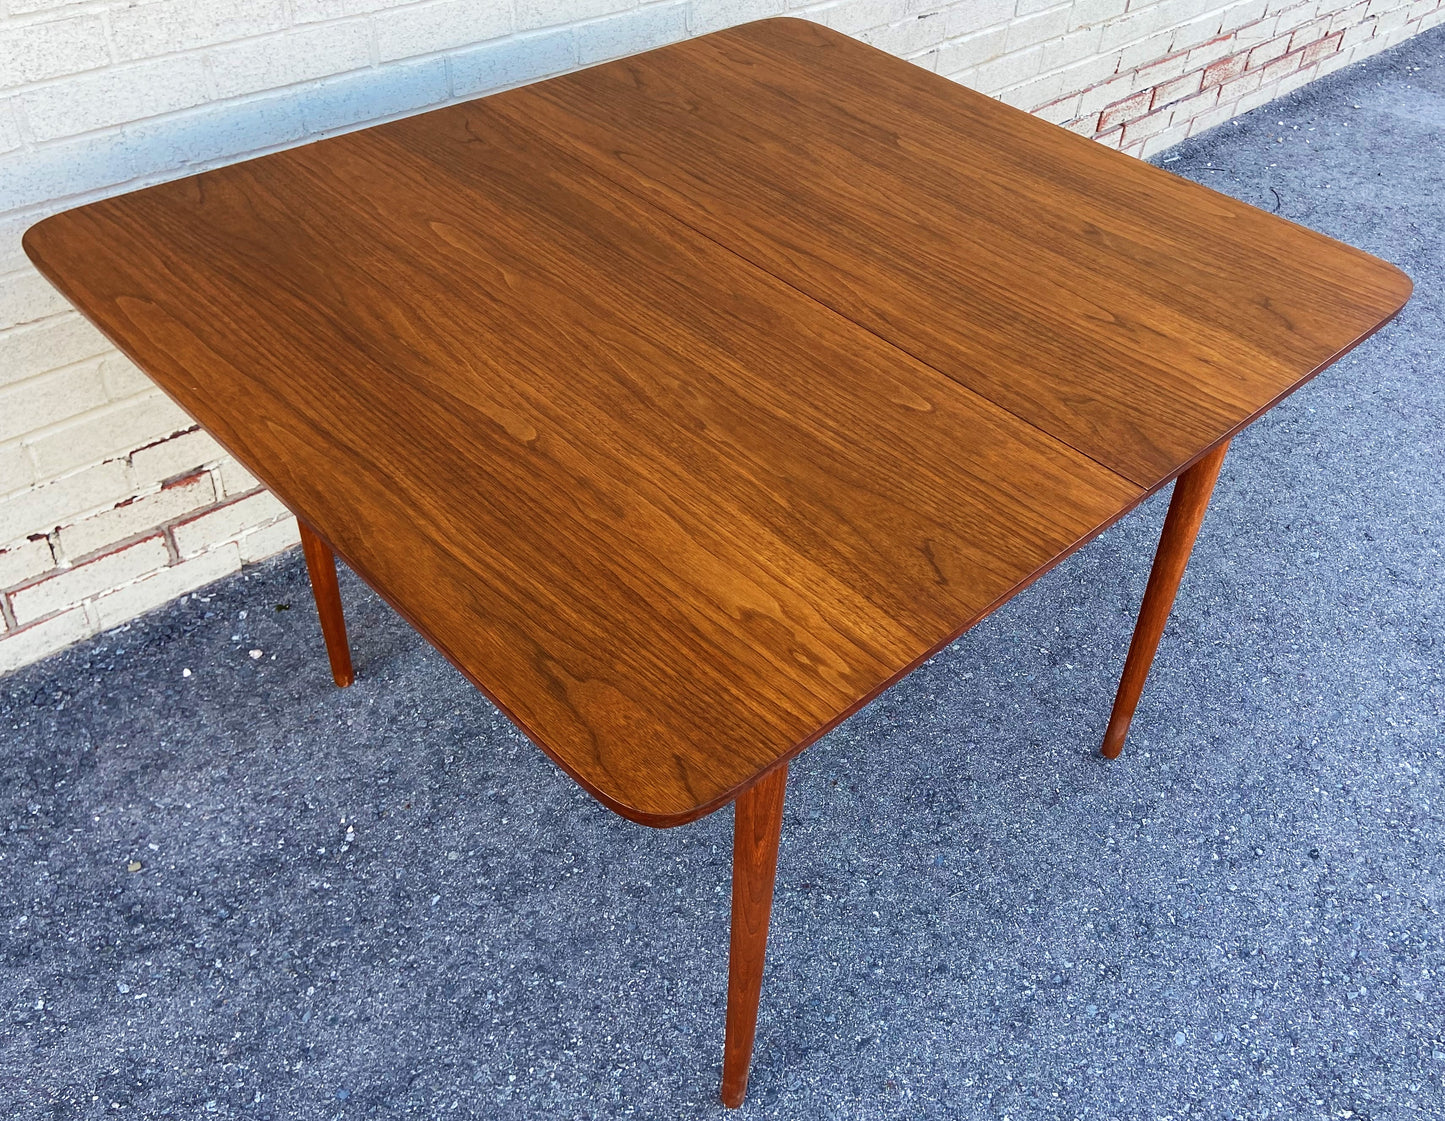 REFINISHED Mid Century Modern Walnut Table w 3 Leaves by Honderich 46" -98"